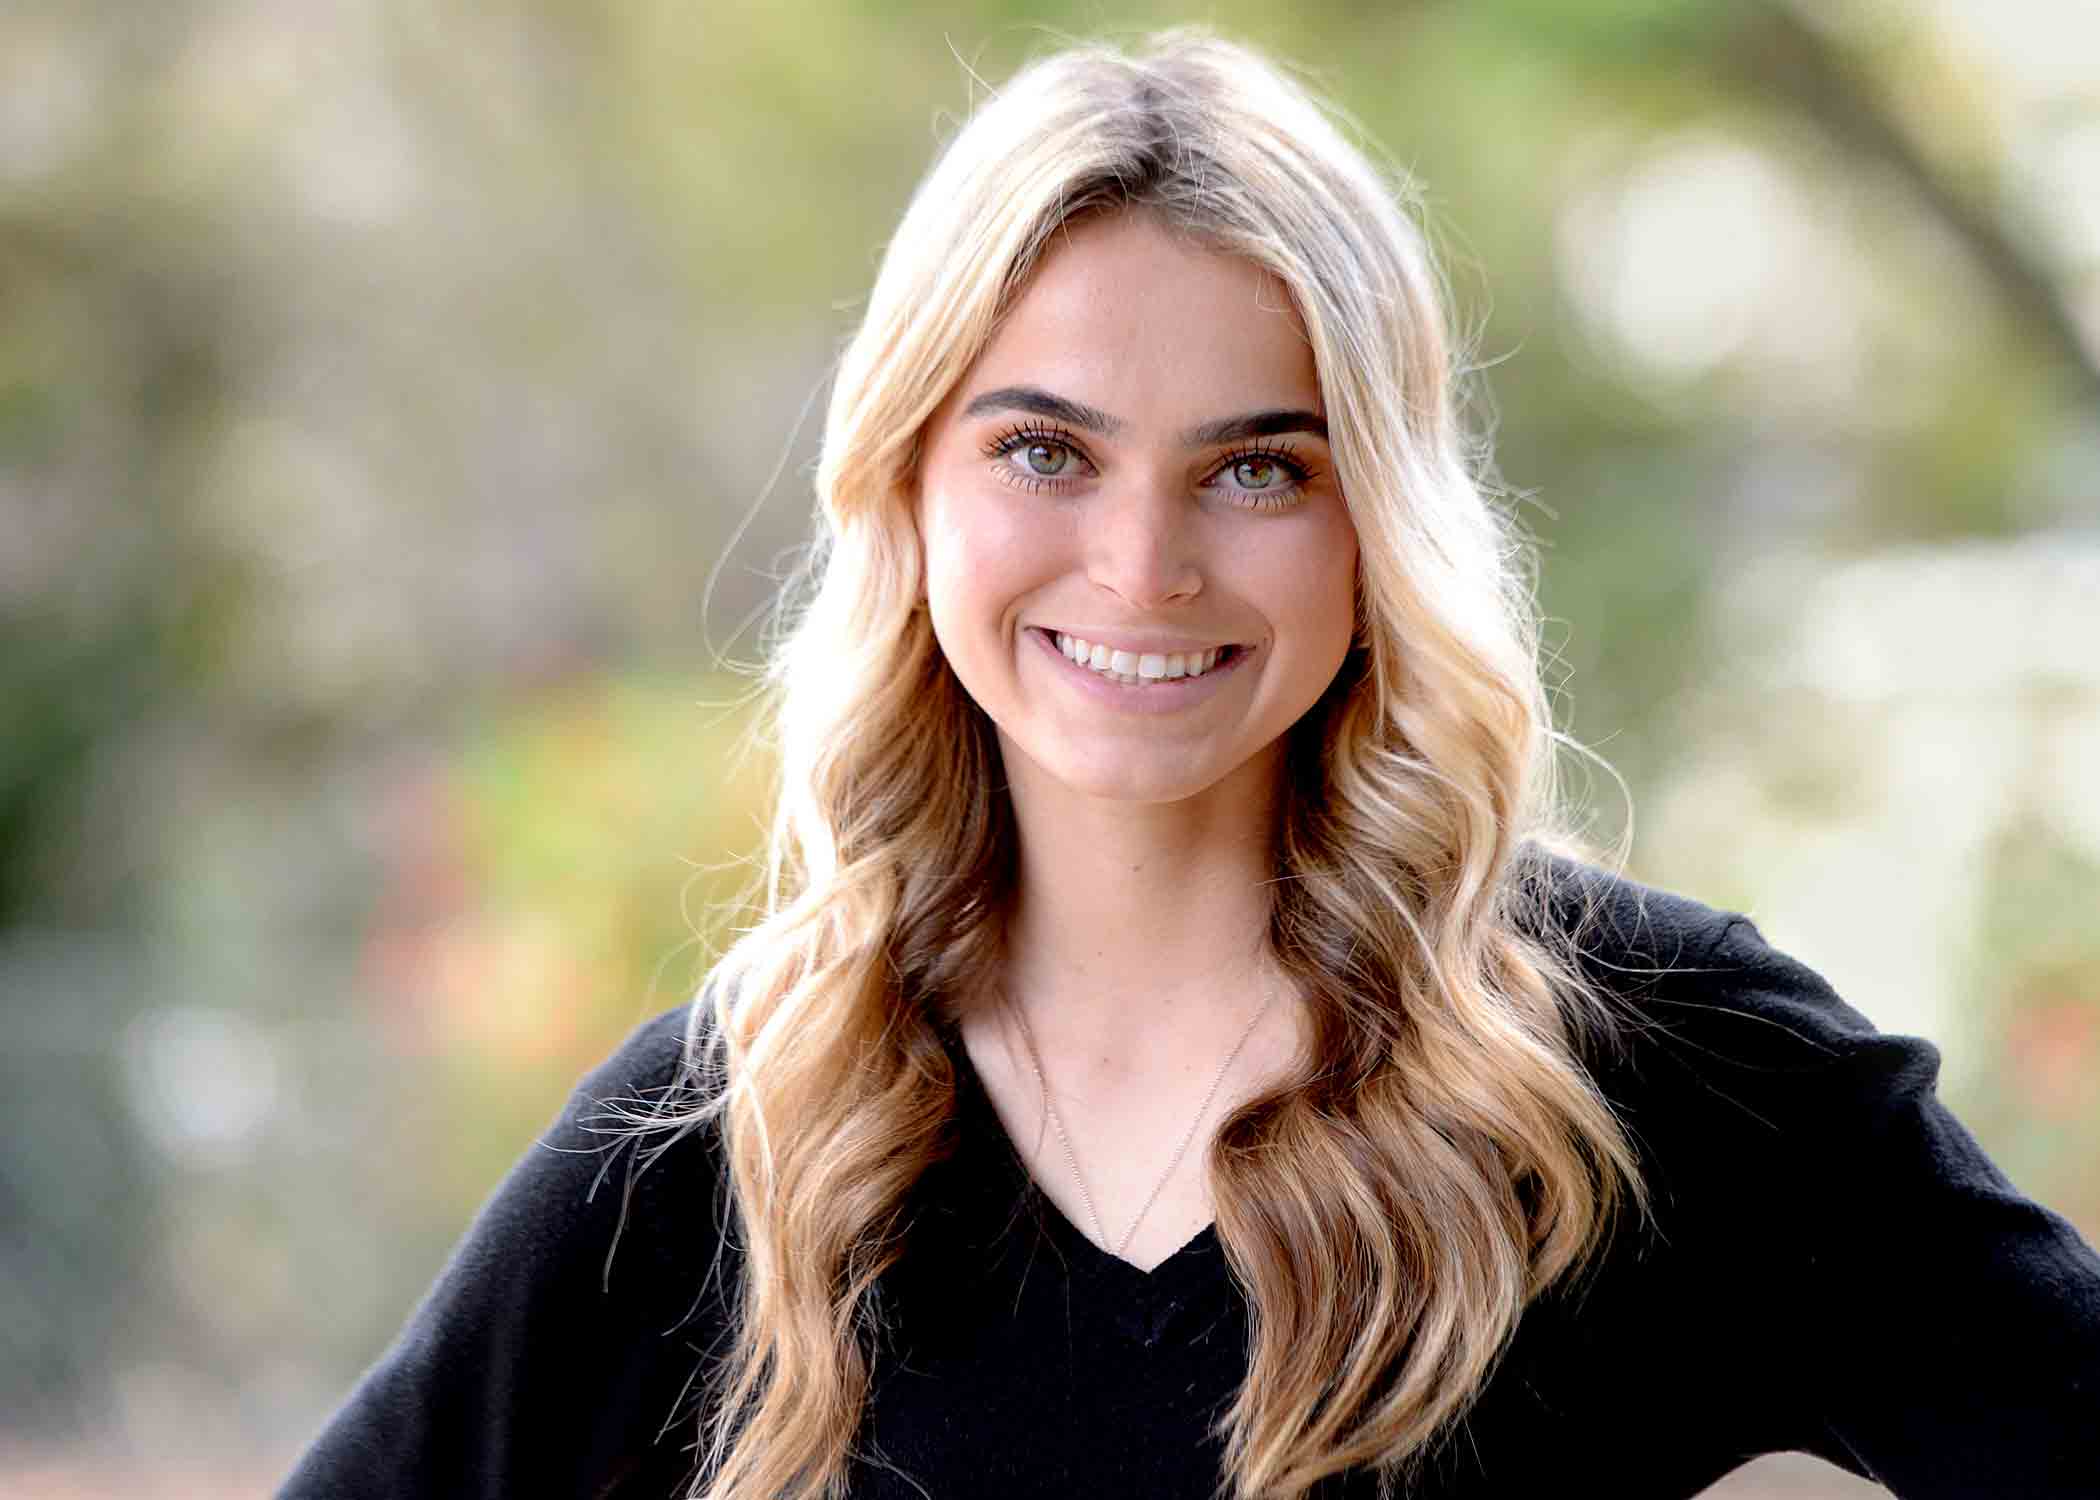 Nikki Trucco wears a black shirt and smiles for her headshot.